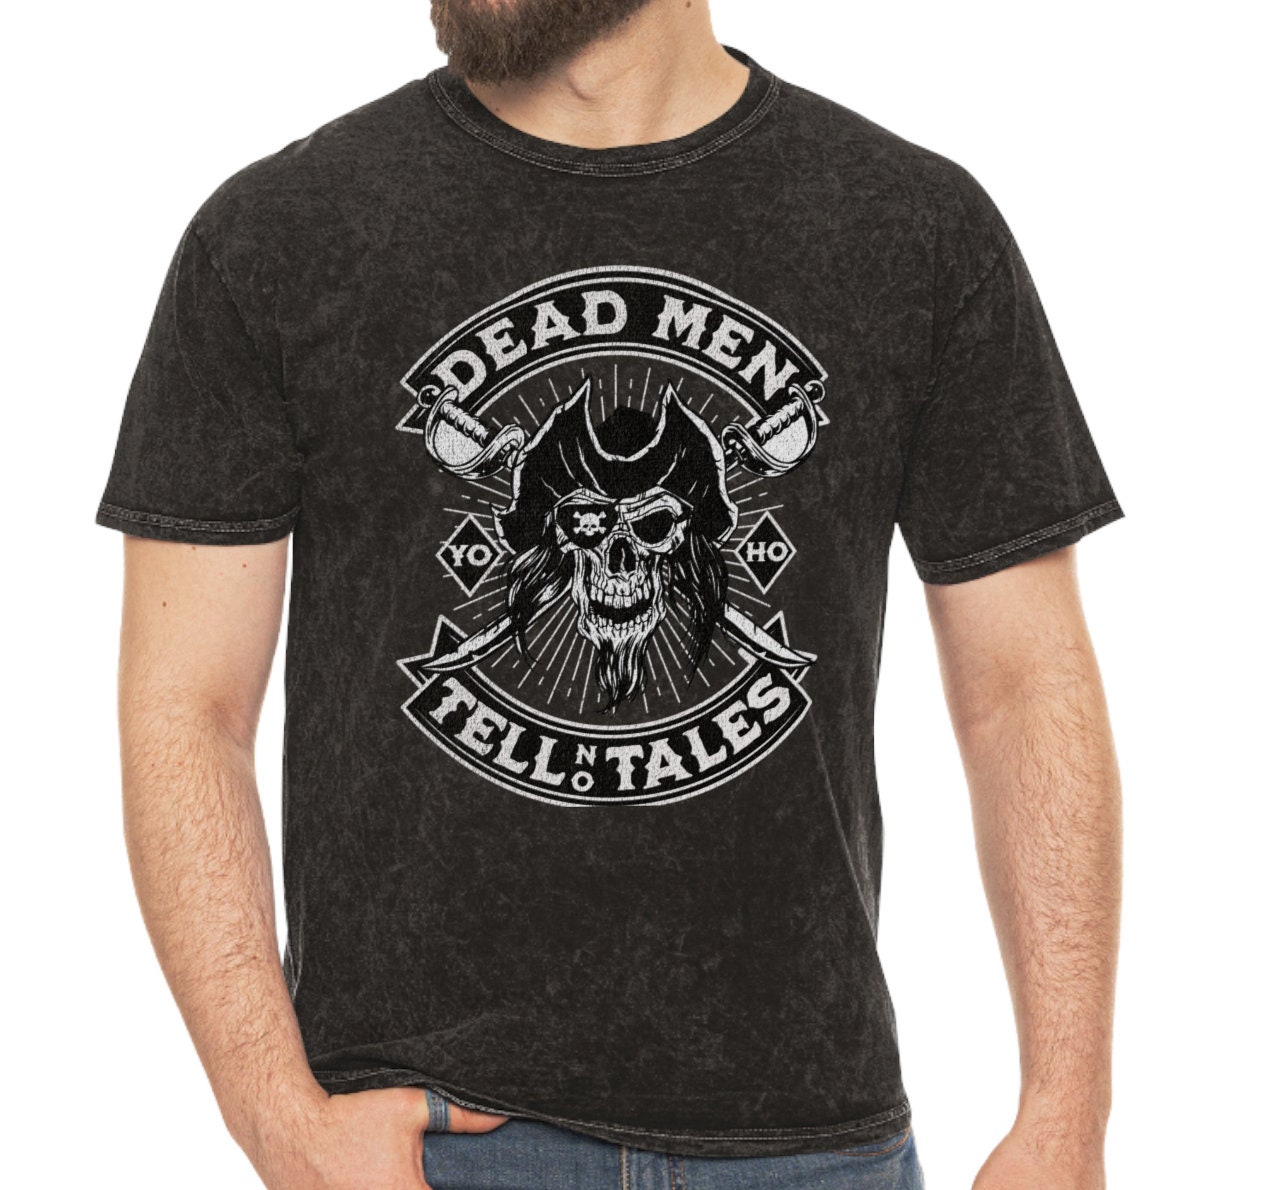 Discover Dead Men Tell No Tales Mineral Wash Mineral Wash T-Shirt, Pirates of the Caribbean Shirt